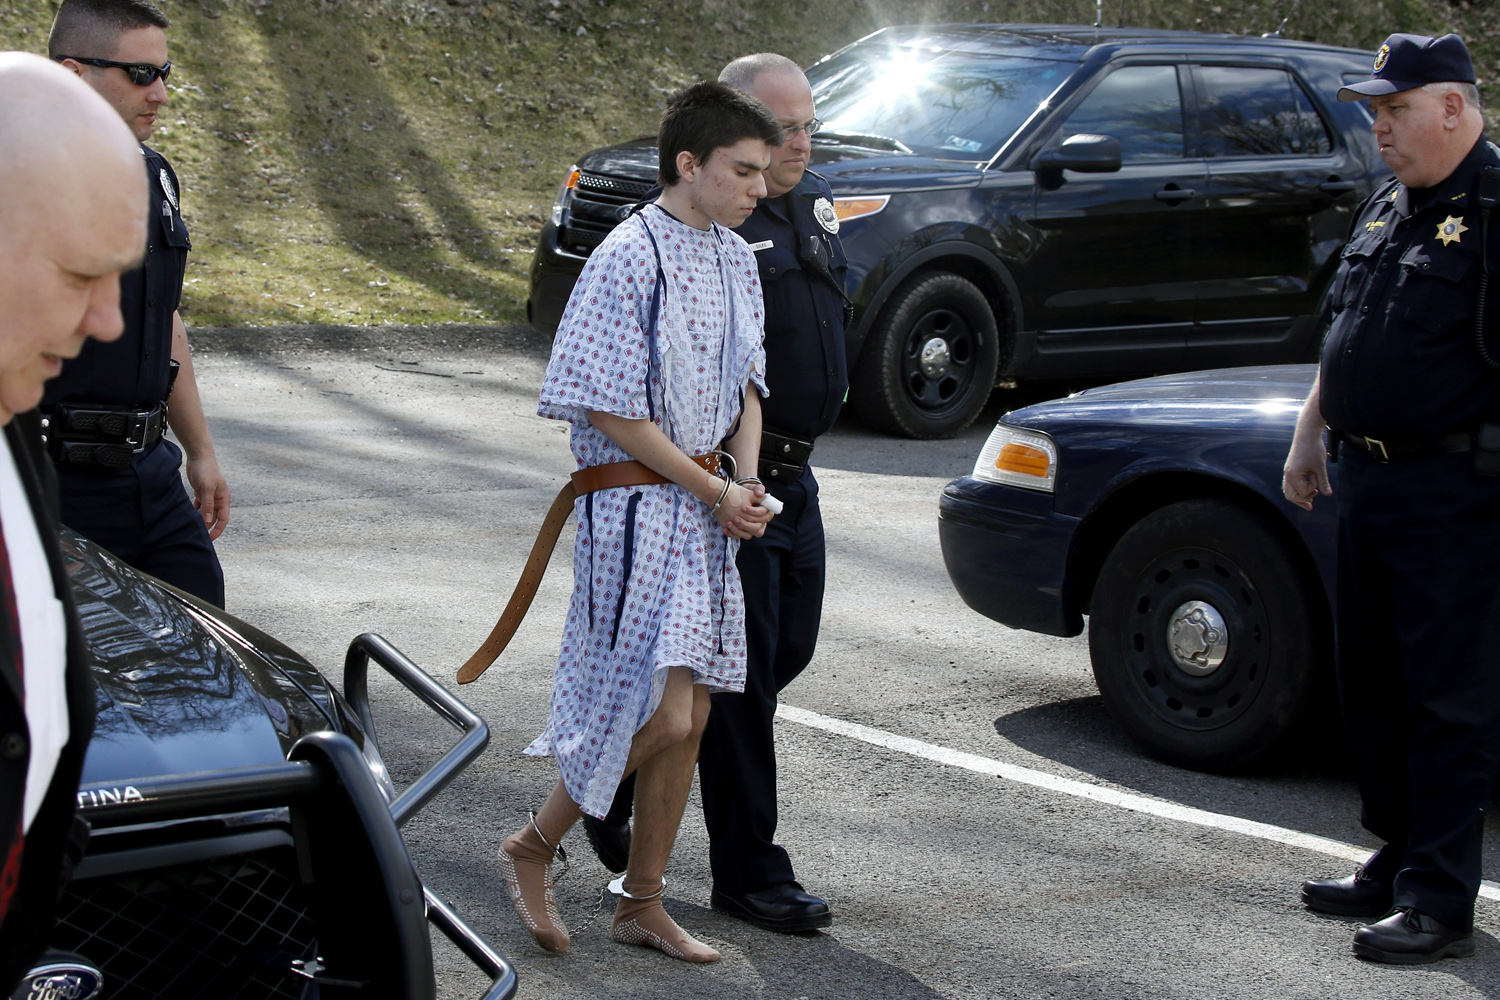 Apr. 9, 2014, Alex Hribal, the suspect in the multiple stabbings at the Franklin Regional High School in Murrysville, Pa., is escorted by police to a district magistrate to be arraigned on Wednesday in Export, Pa.